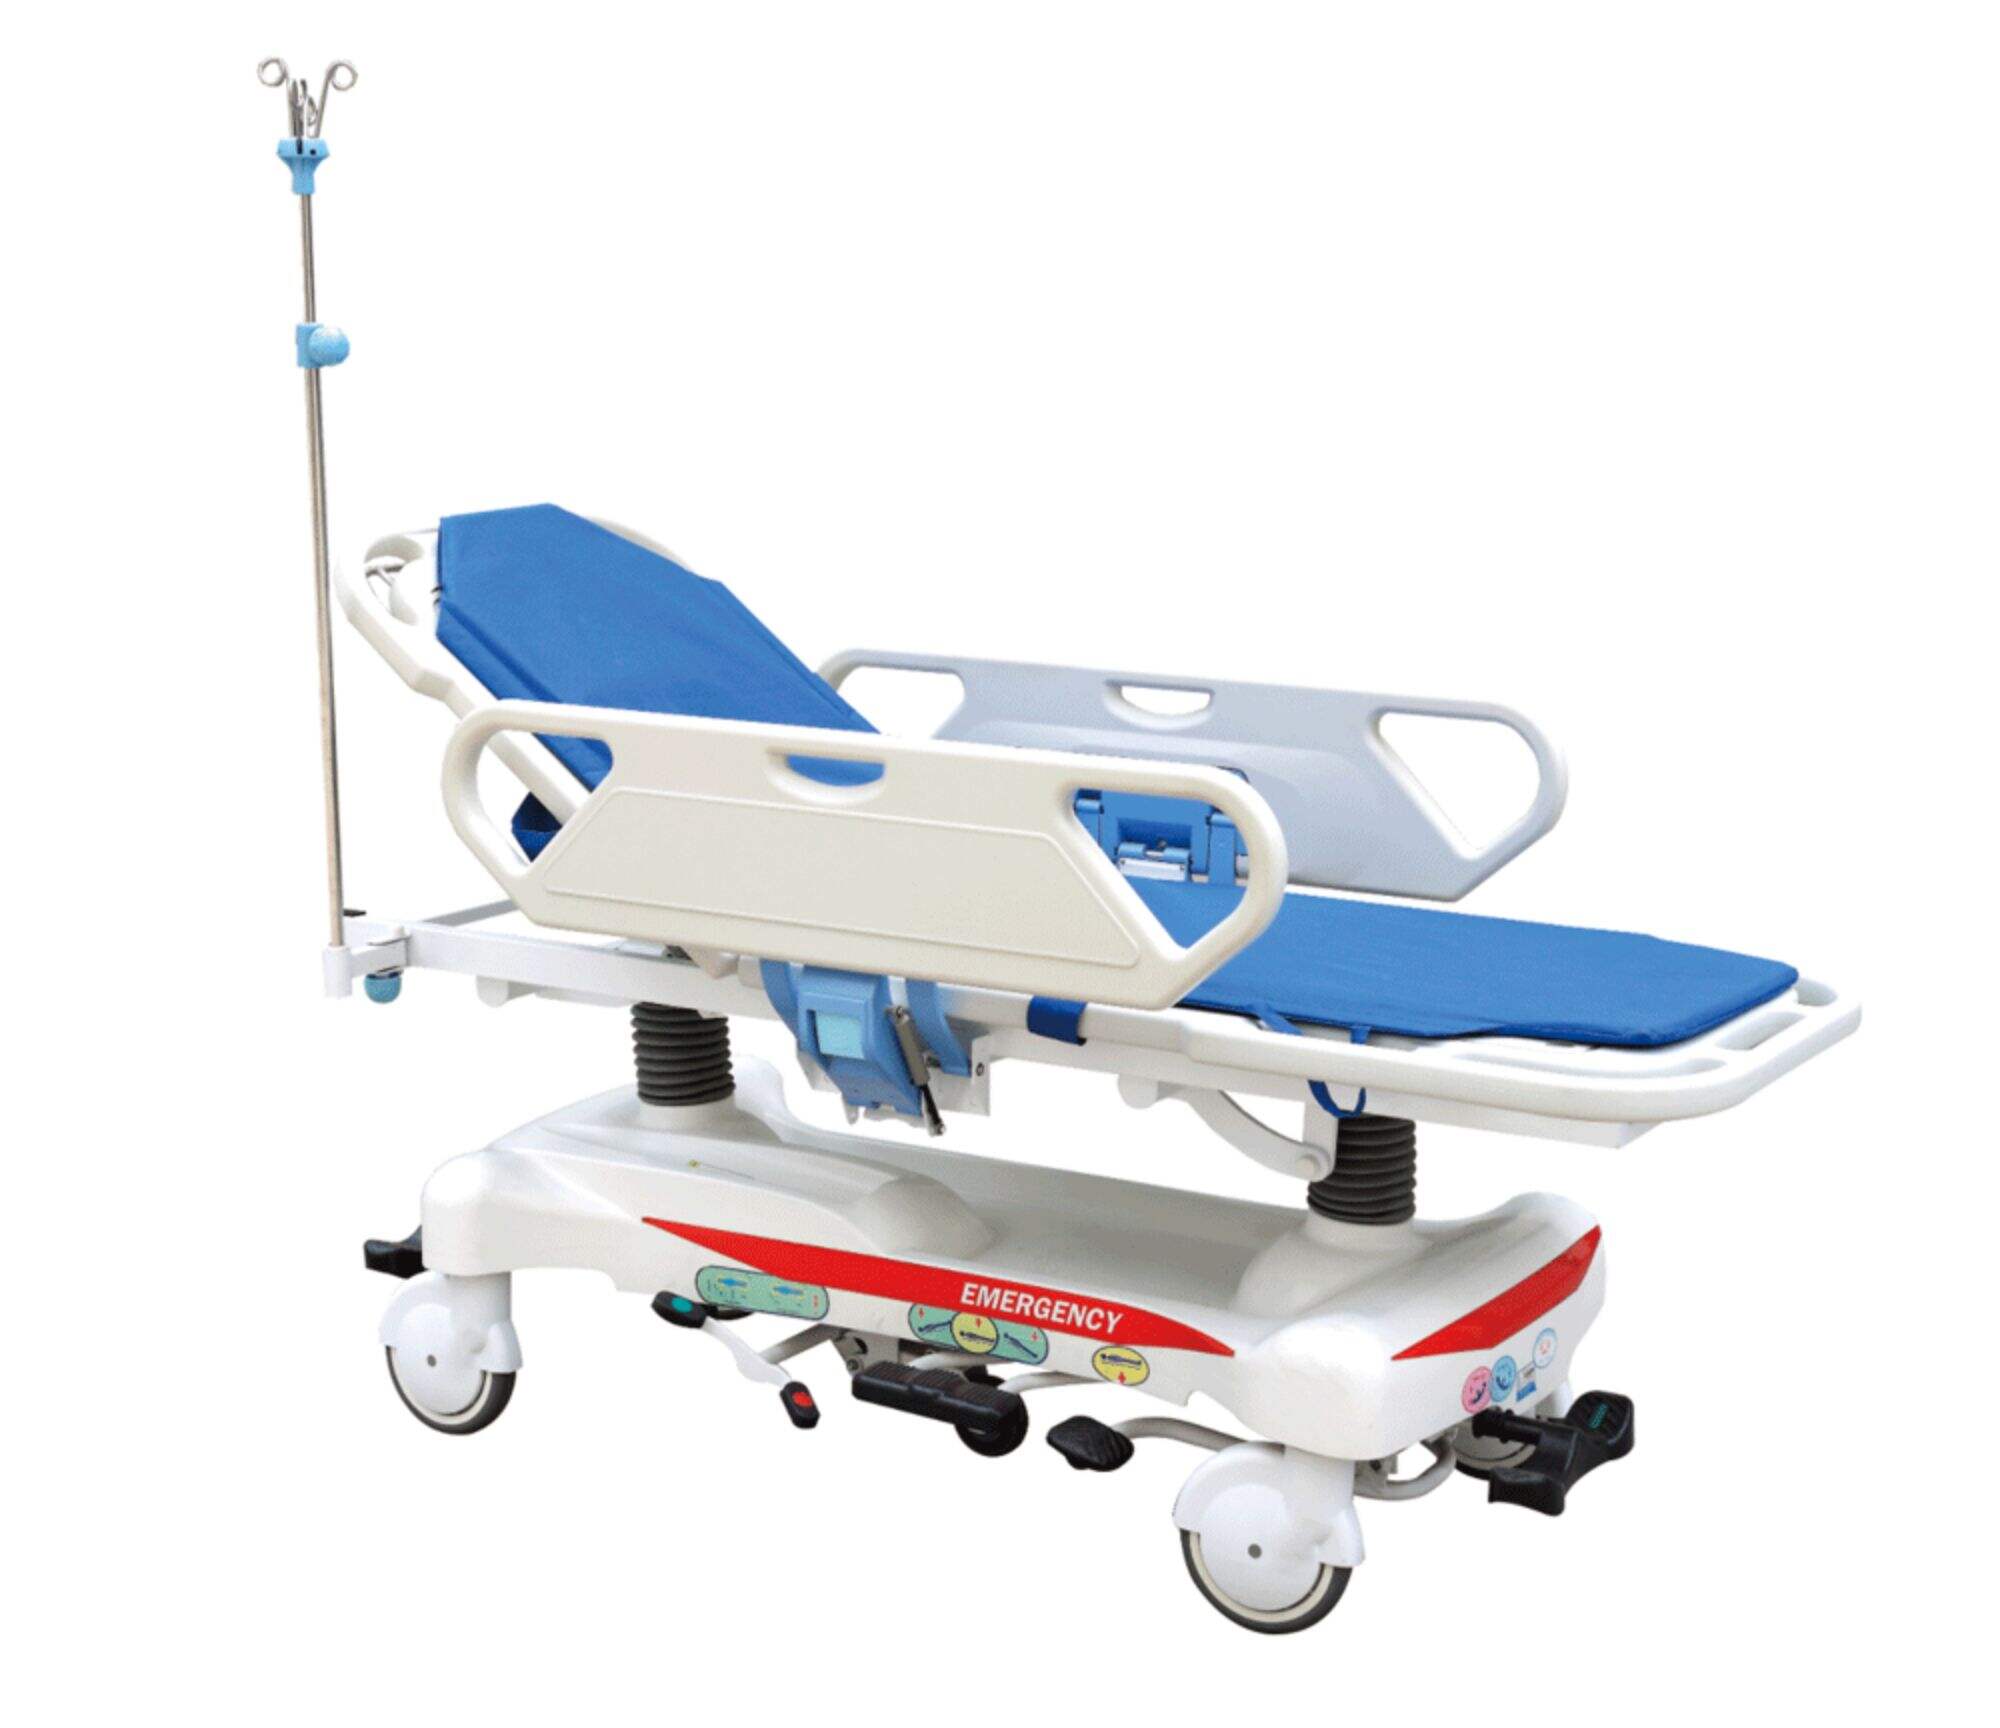 YXH-4C First aid Patient Transfer Stretcher Cart